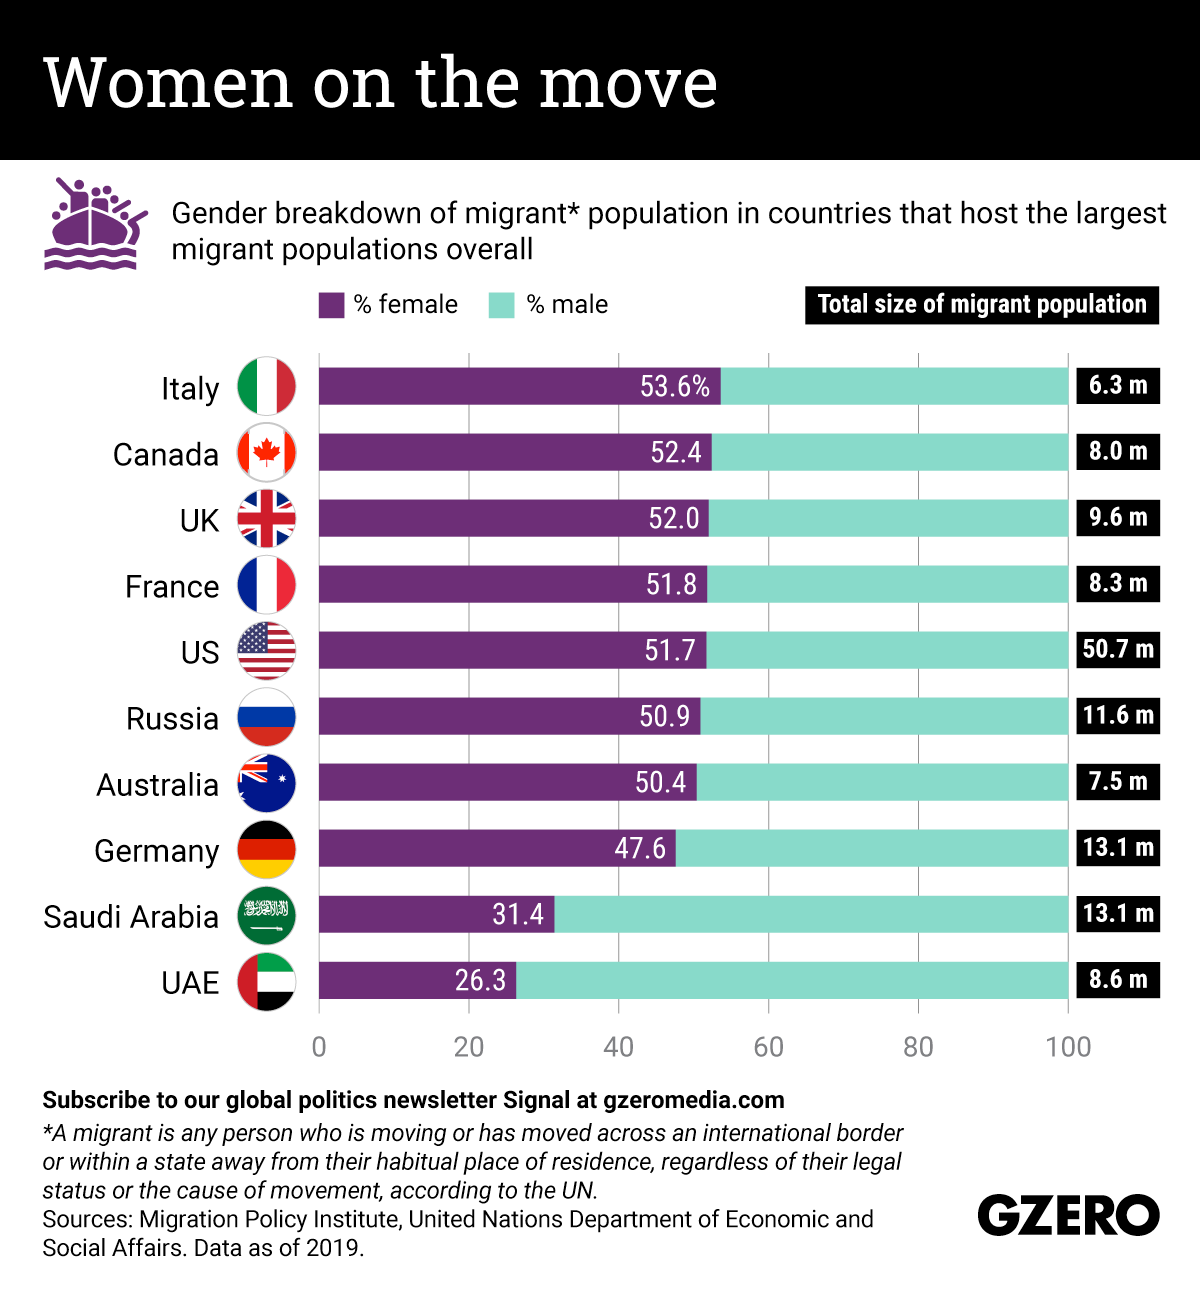 The Graphic Truth: Women on the move